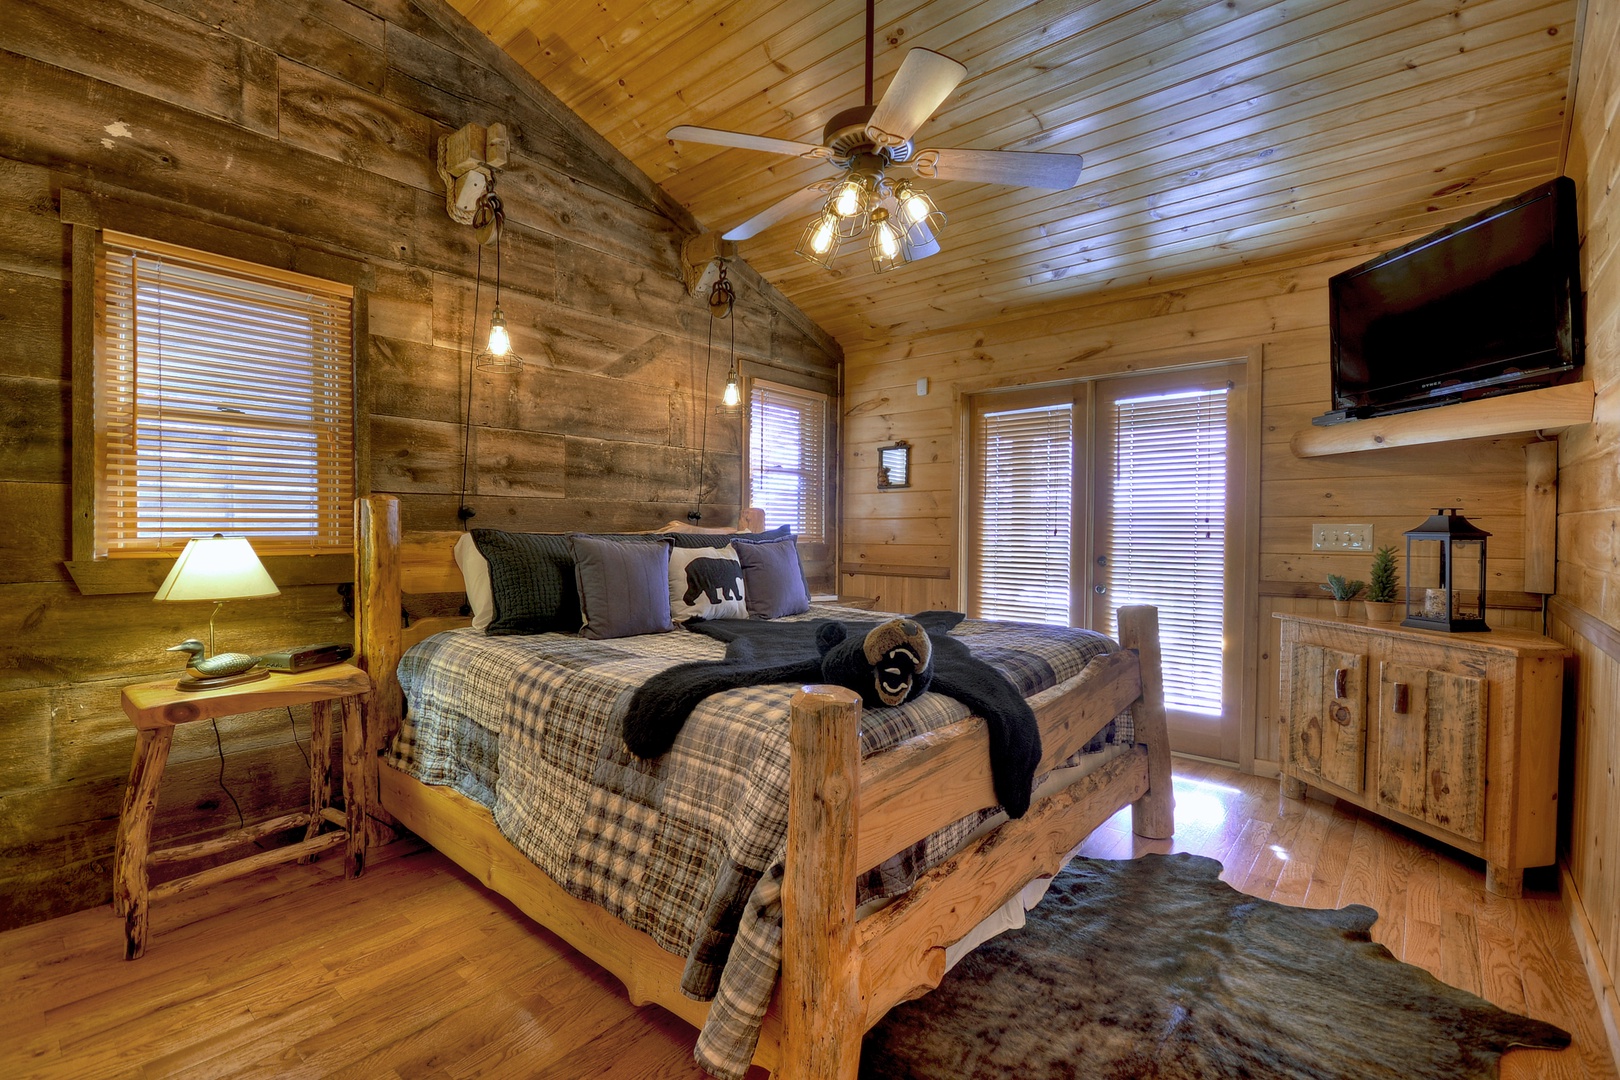 Grand Mountain Lodge- Entry level master king bedroom with a TV and deck access